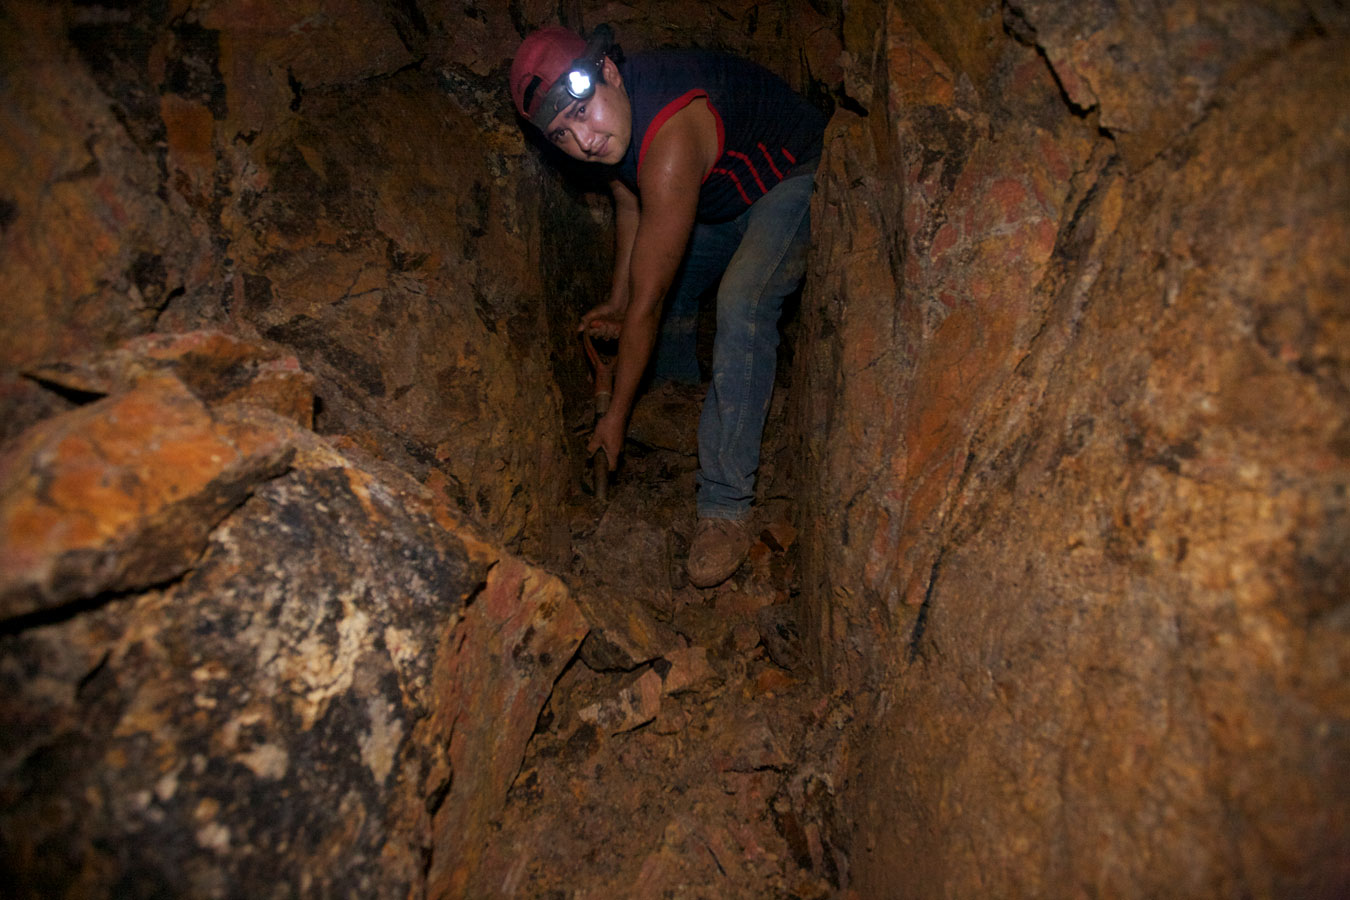 A young gold miner underground shovels gold ore in a tunnel. The small-scale miners have no equipment, it is forbidden by the terms of the concession to Canadian mining corporation 'B2 Gold' which allows only 1% of the mining to be done by small-scale miners.